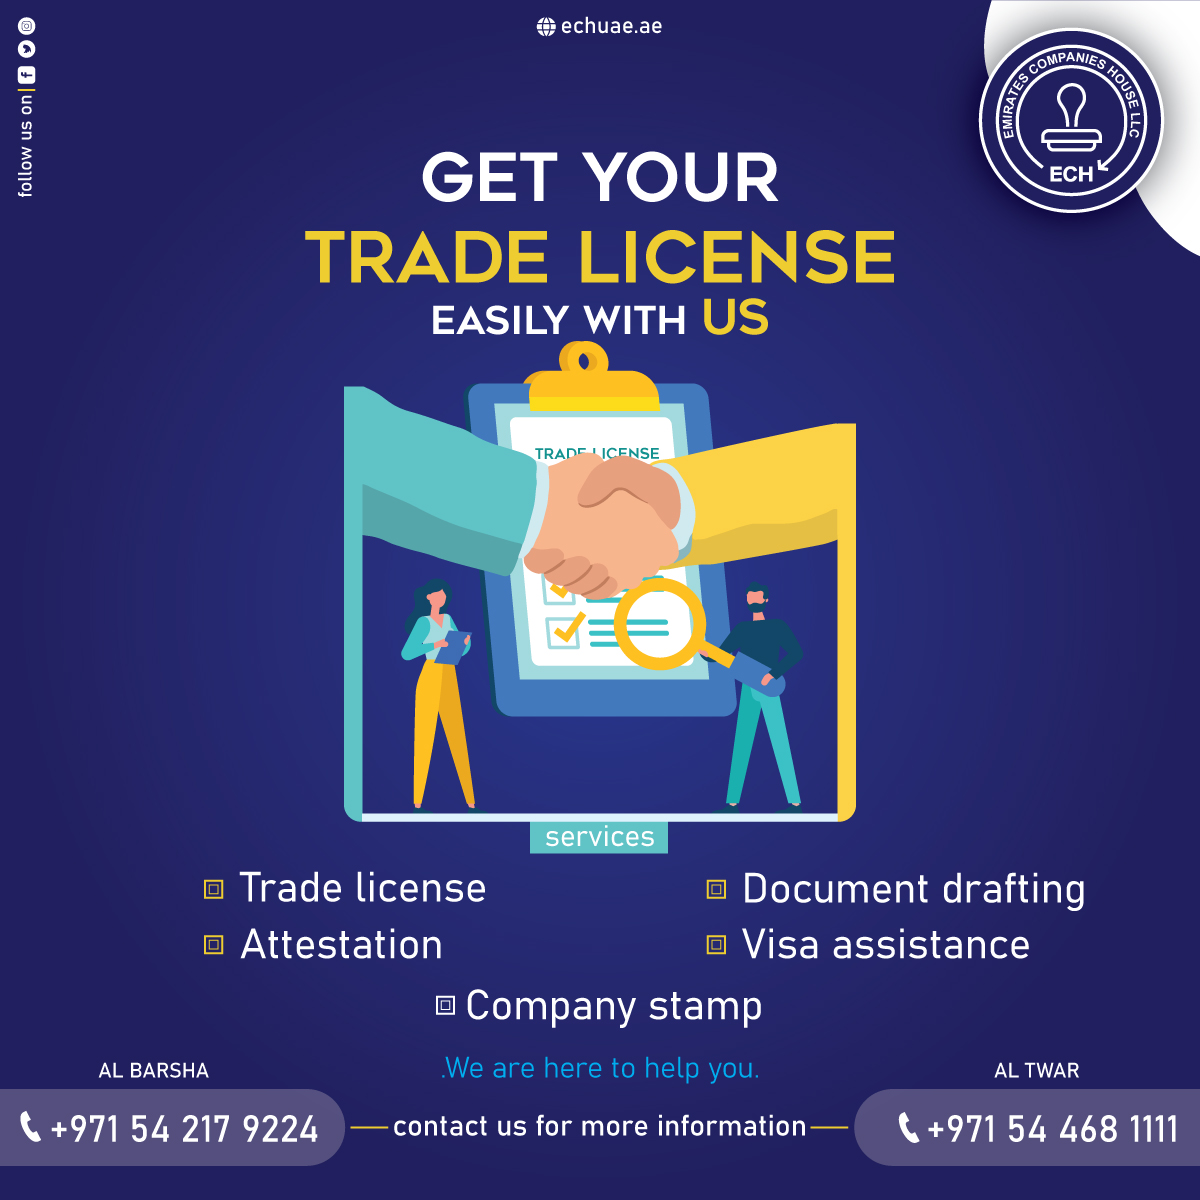 GET YOUR TRADE LICENSE EASILY WITH US. WE ARE HERE TO SERVE YOU CONTACT ECH
'Your Gateway to all Government services

Contact No:
▶️ Call : +971 544 681 111 , +971 54306 1888
#tradelicensedubai #trade #tradename #uaesmallbusiness #uaebusiness #uaebusinessnews #dubai